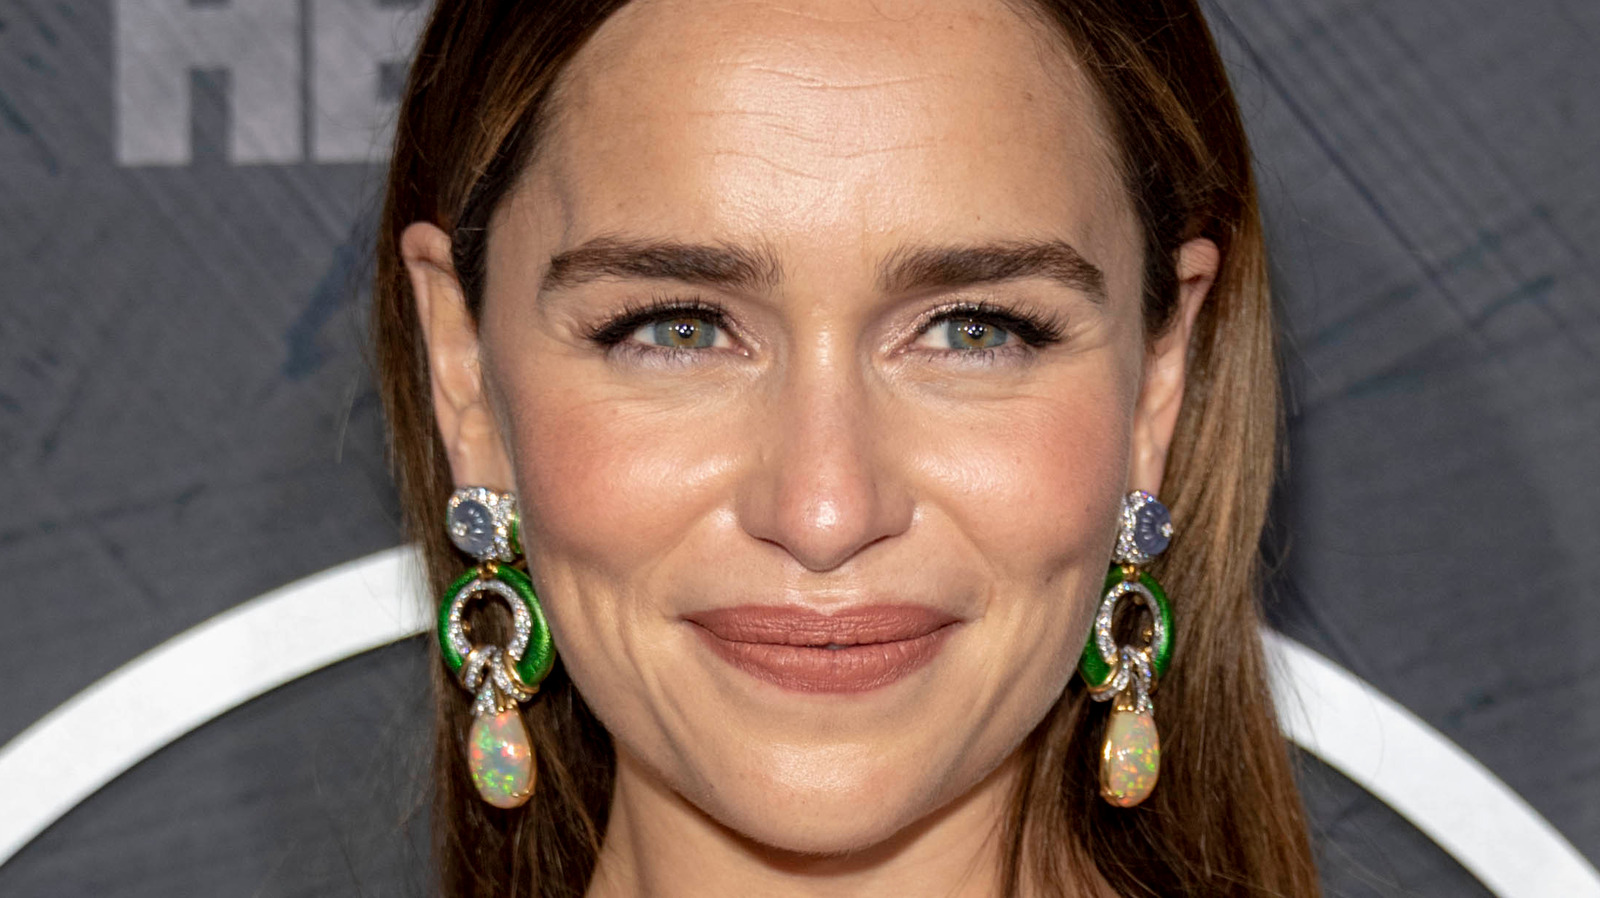 You Probably Never Noticed This About Emilia Clarke's Eyes